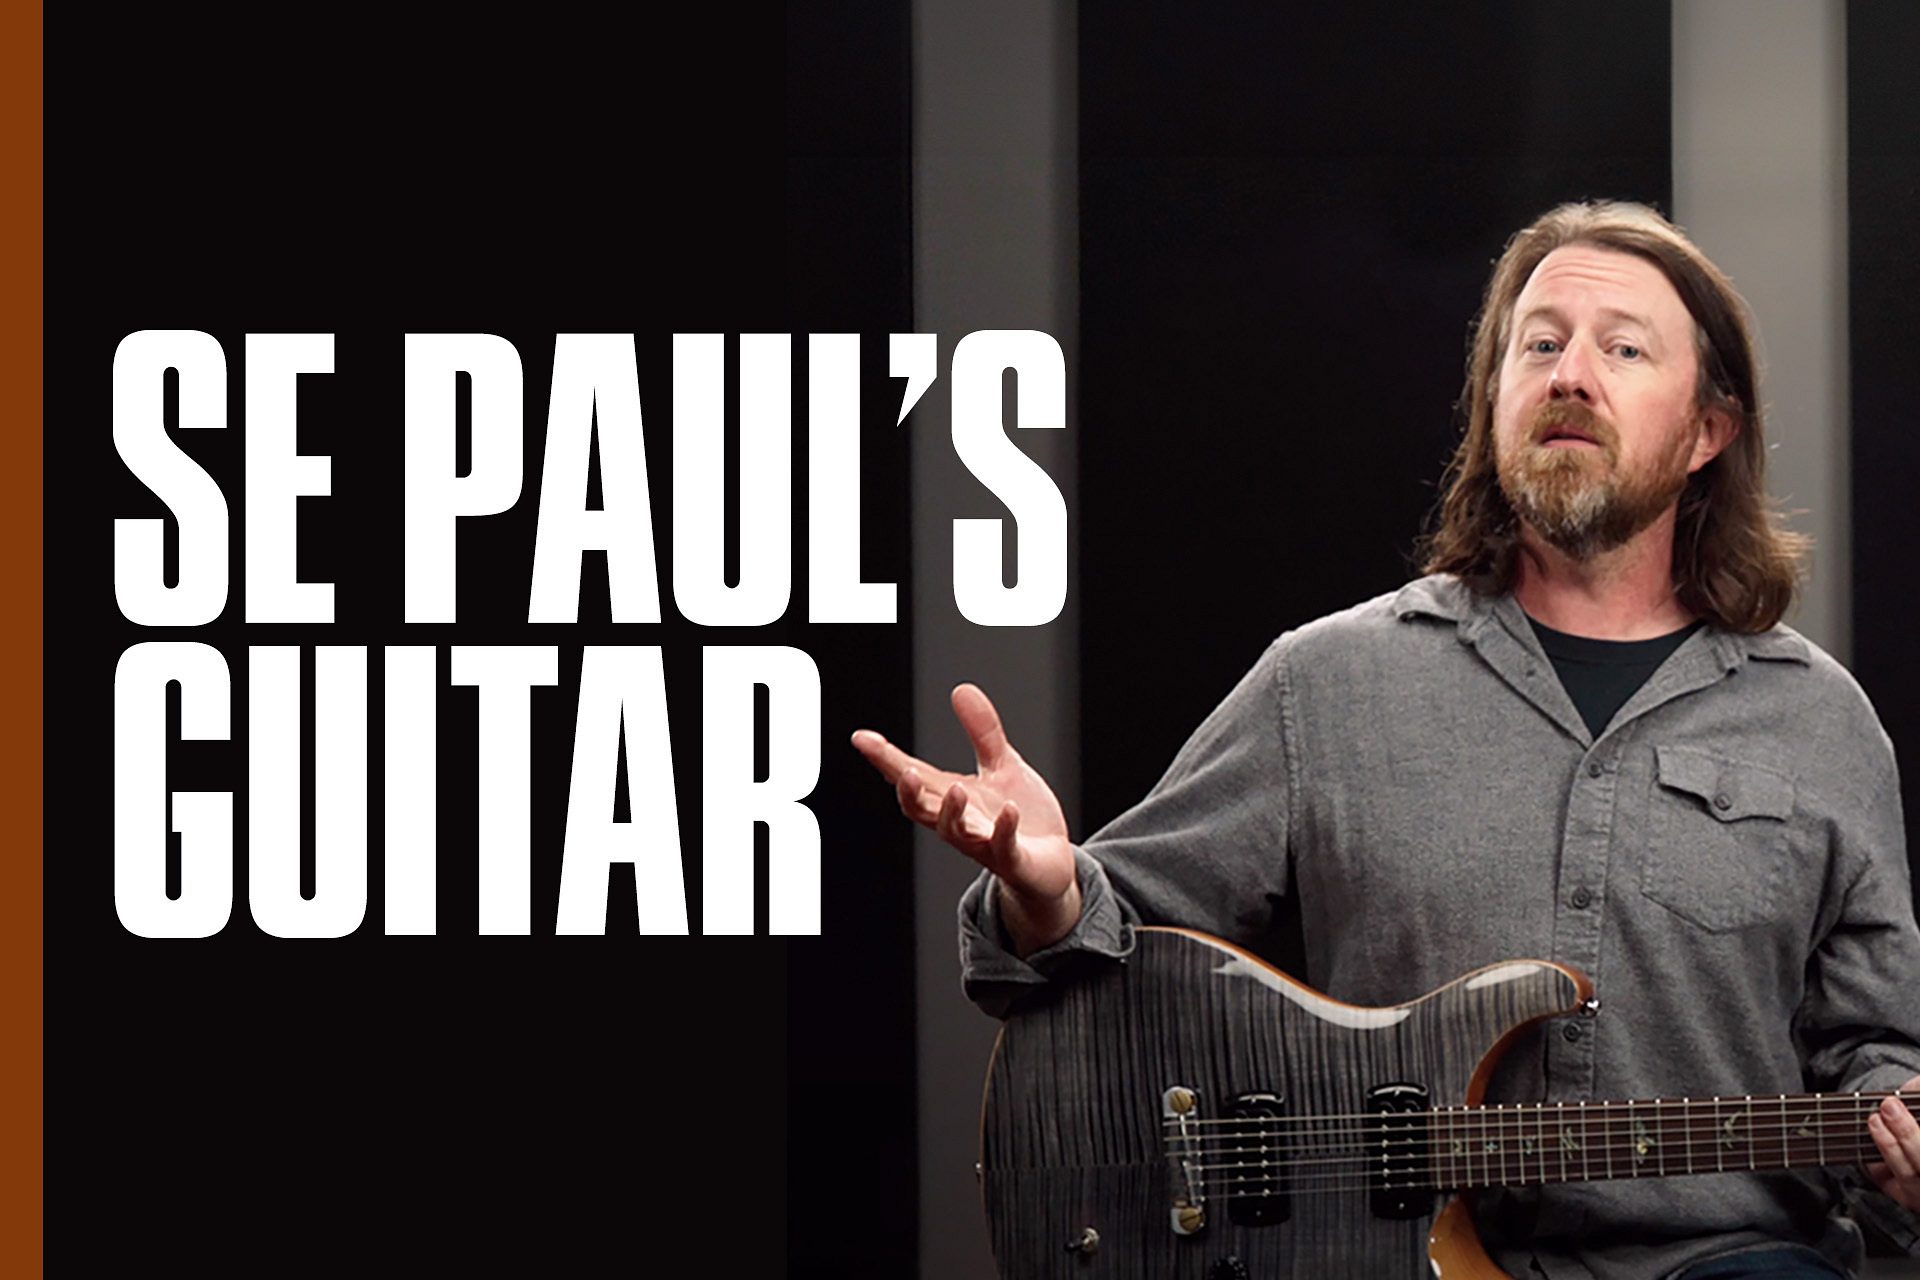 Listen to a Demo of the SE Paul's Guitar!